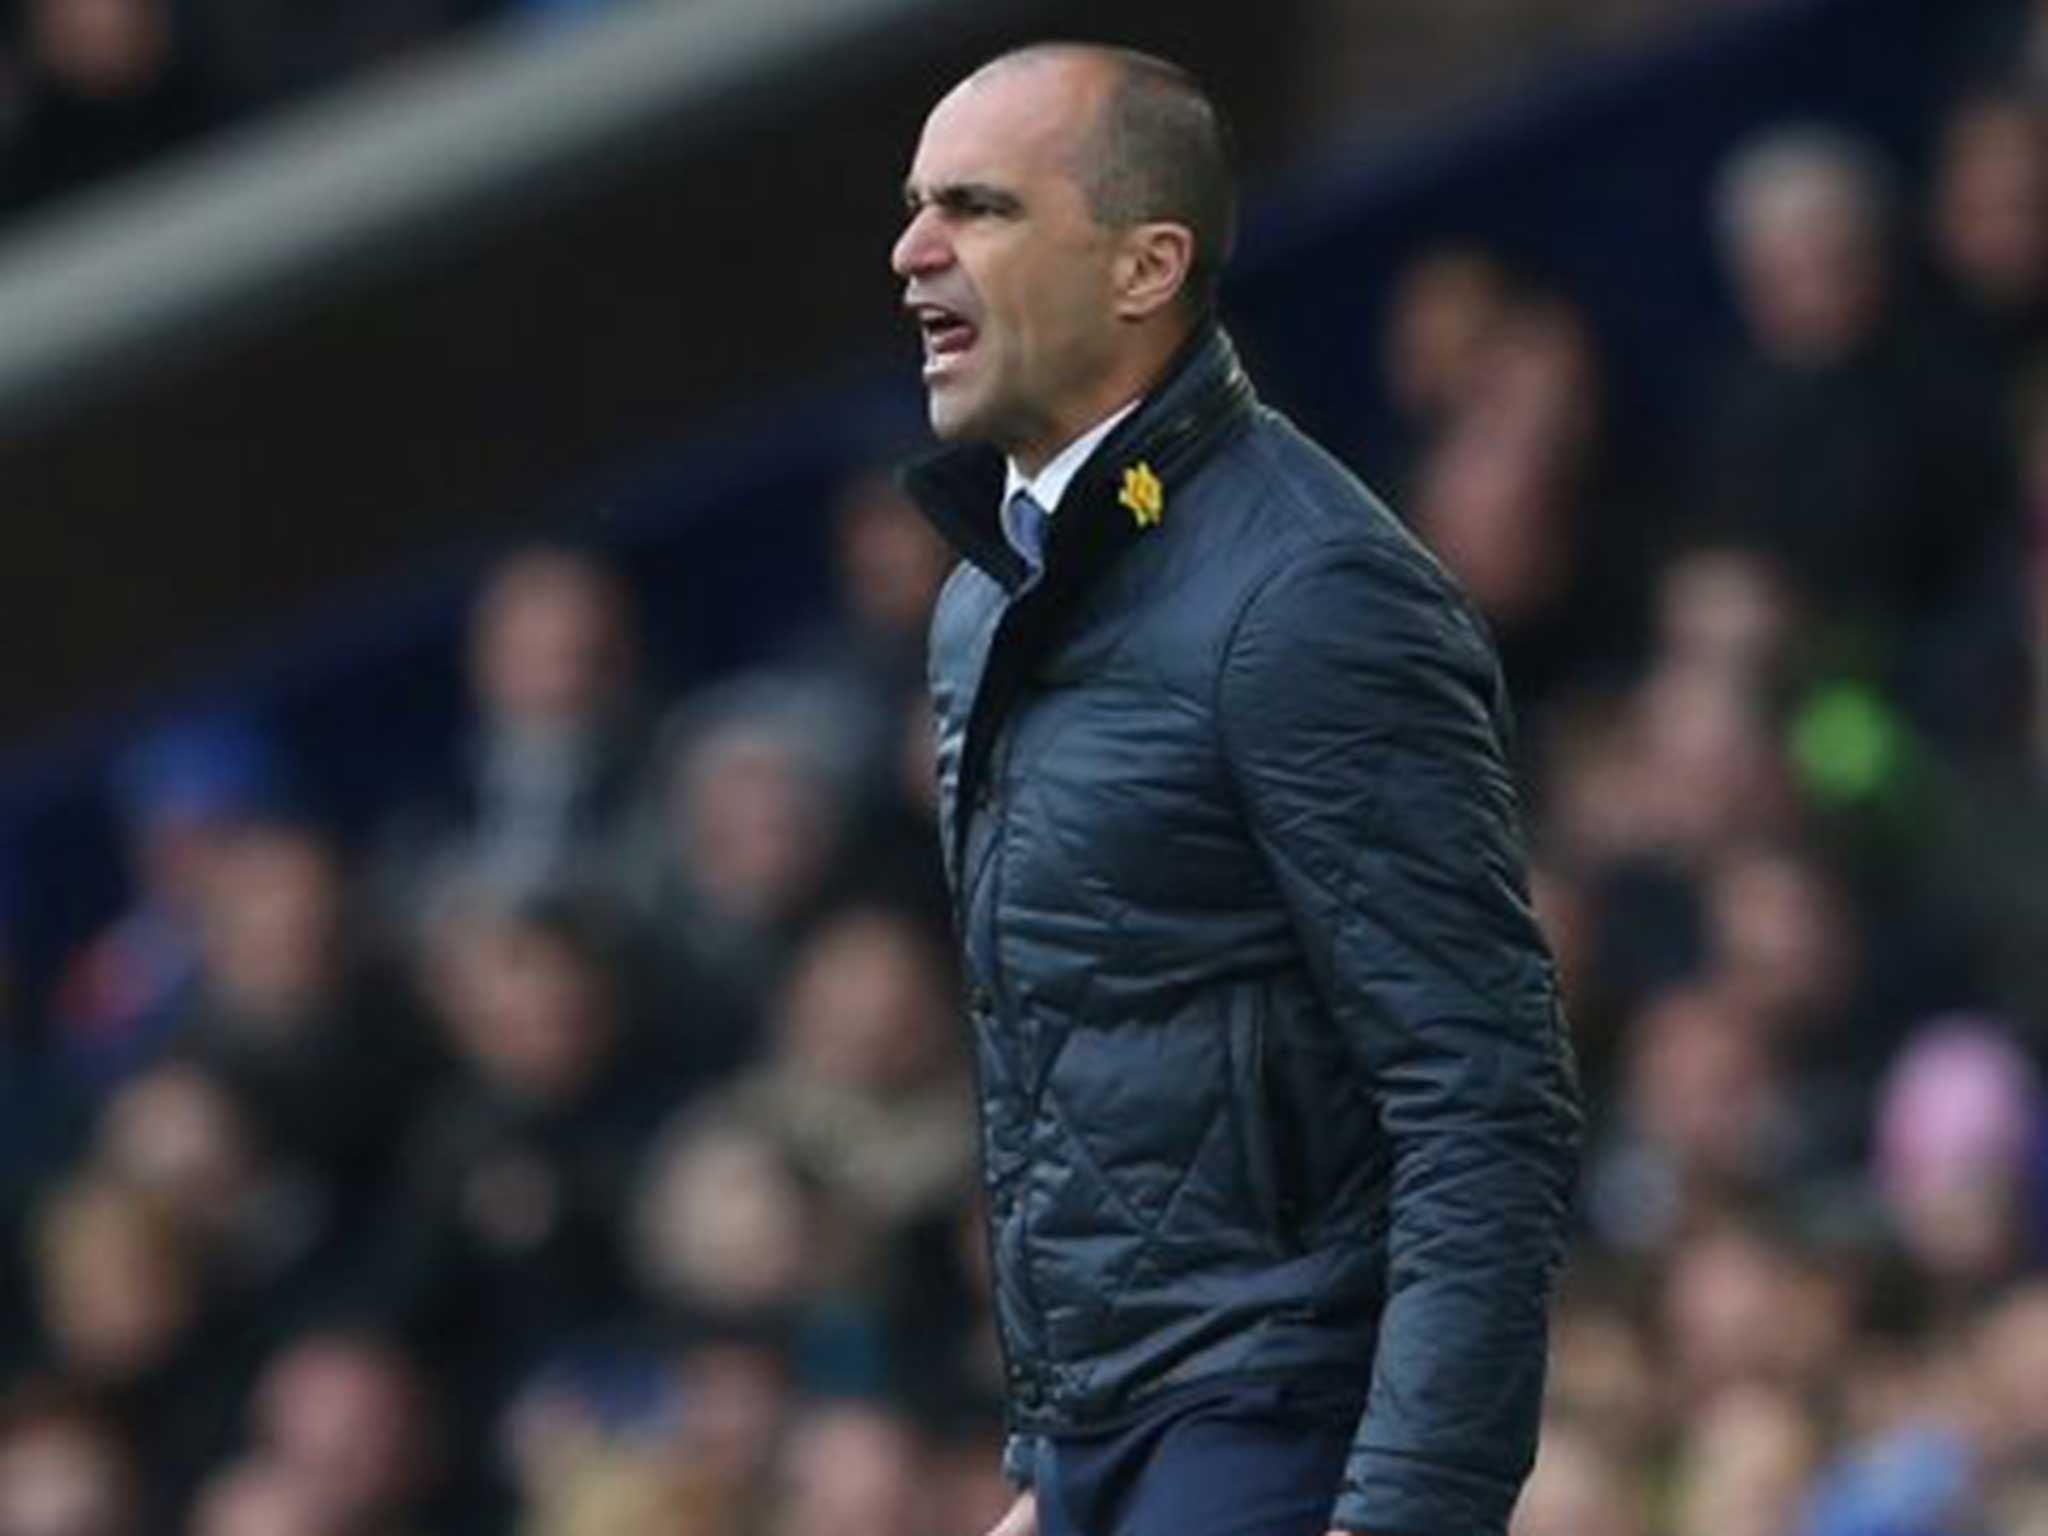 Everton manager Roberto Martinez gets animated at the touchline